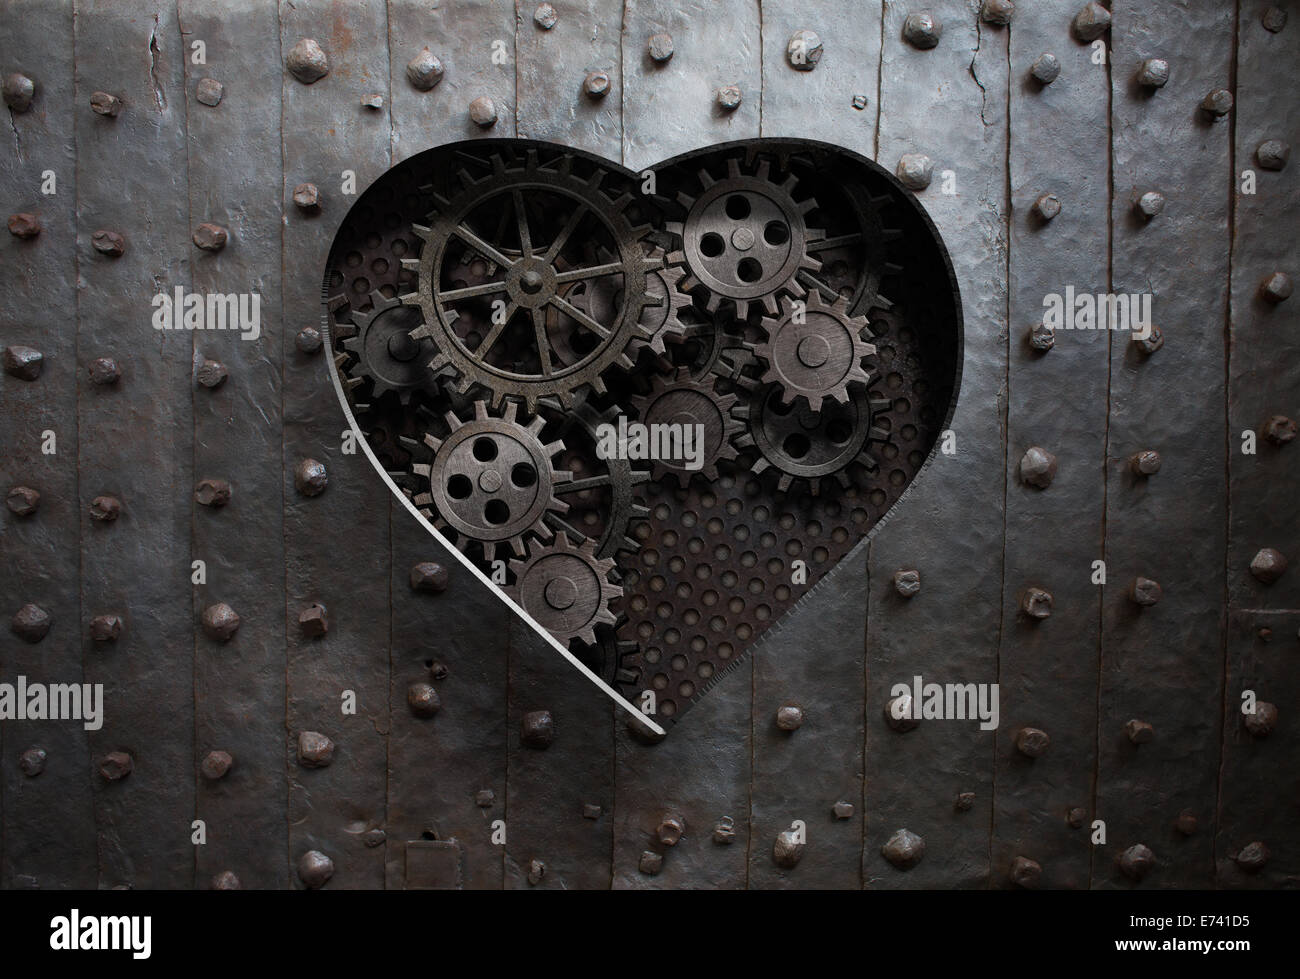 heart hole in old metal with gears and cogs Stock Photo